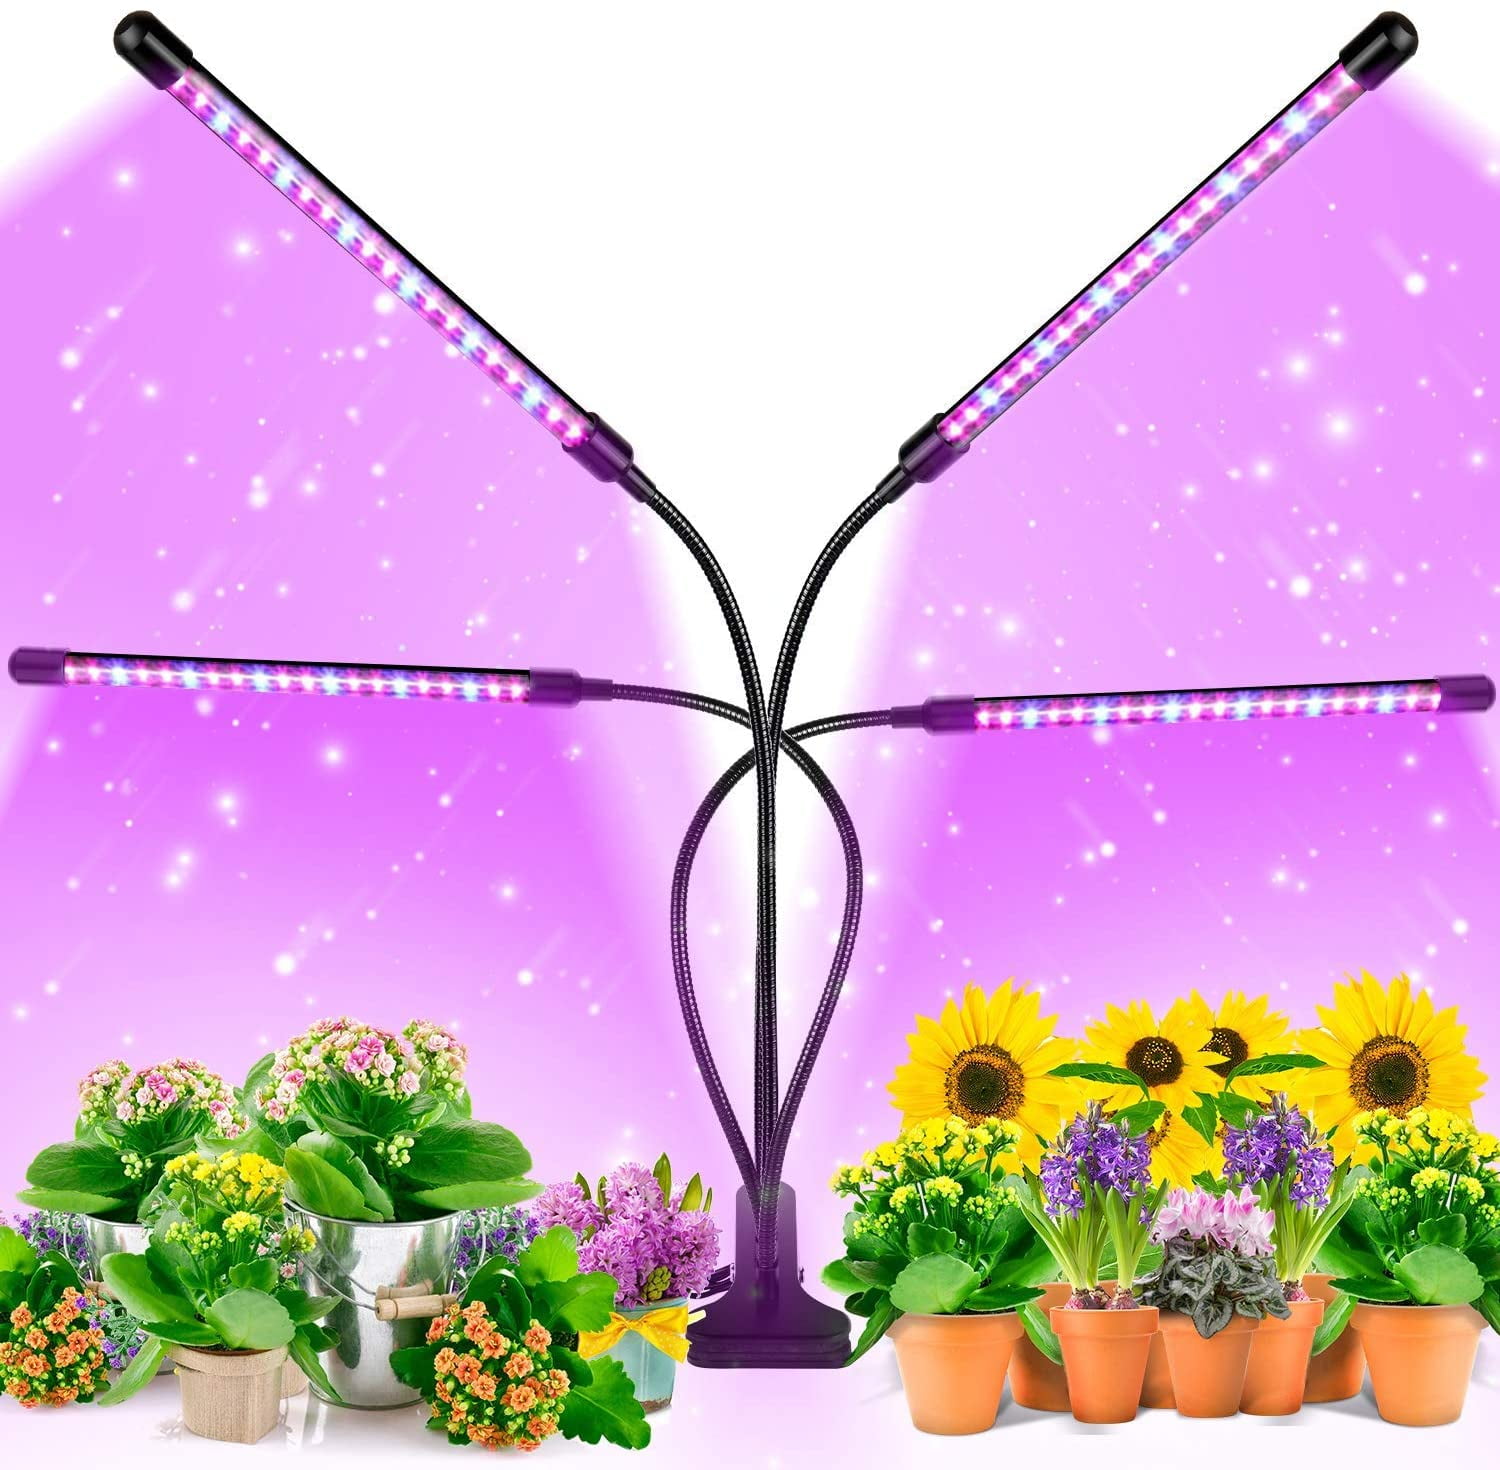 Details about   4 Head 96 LED Grow Light Plant Light Panel Growing Plant Flower Indoor Lamp US 